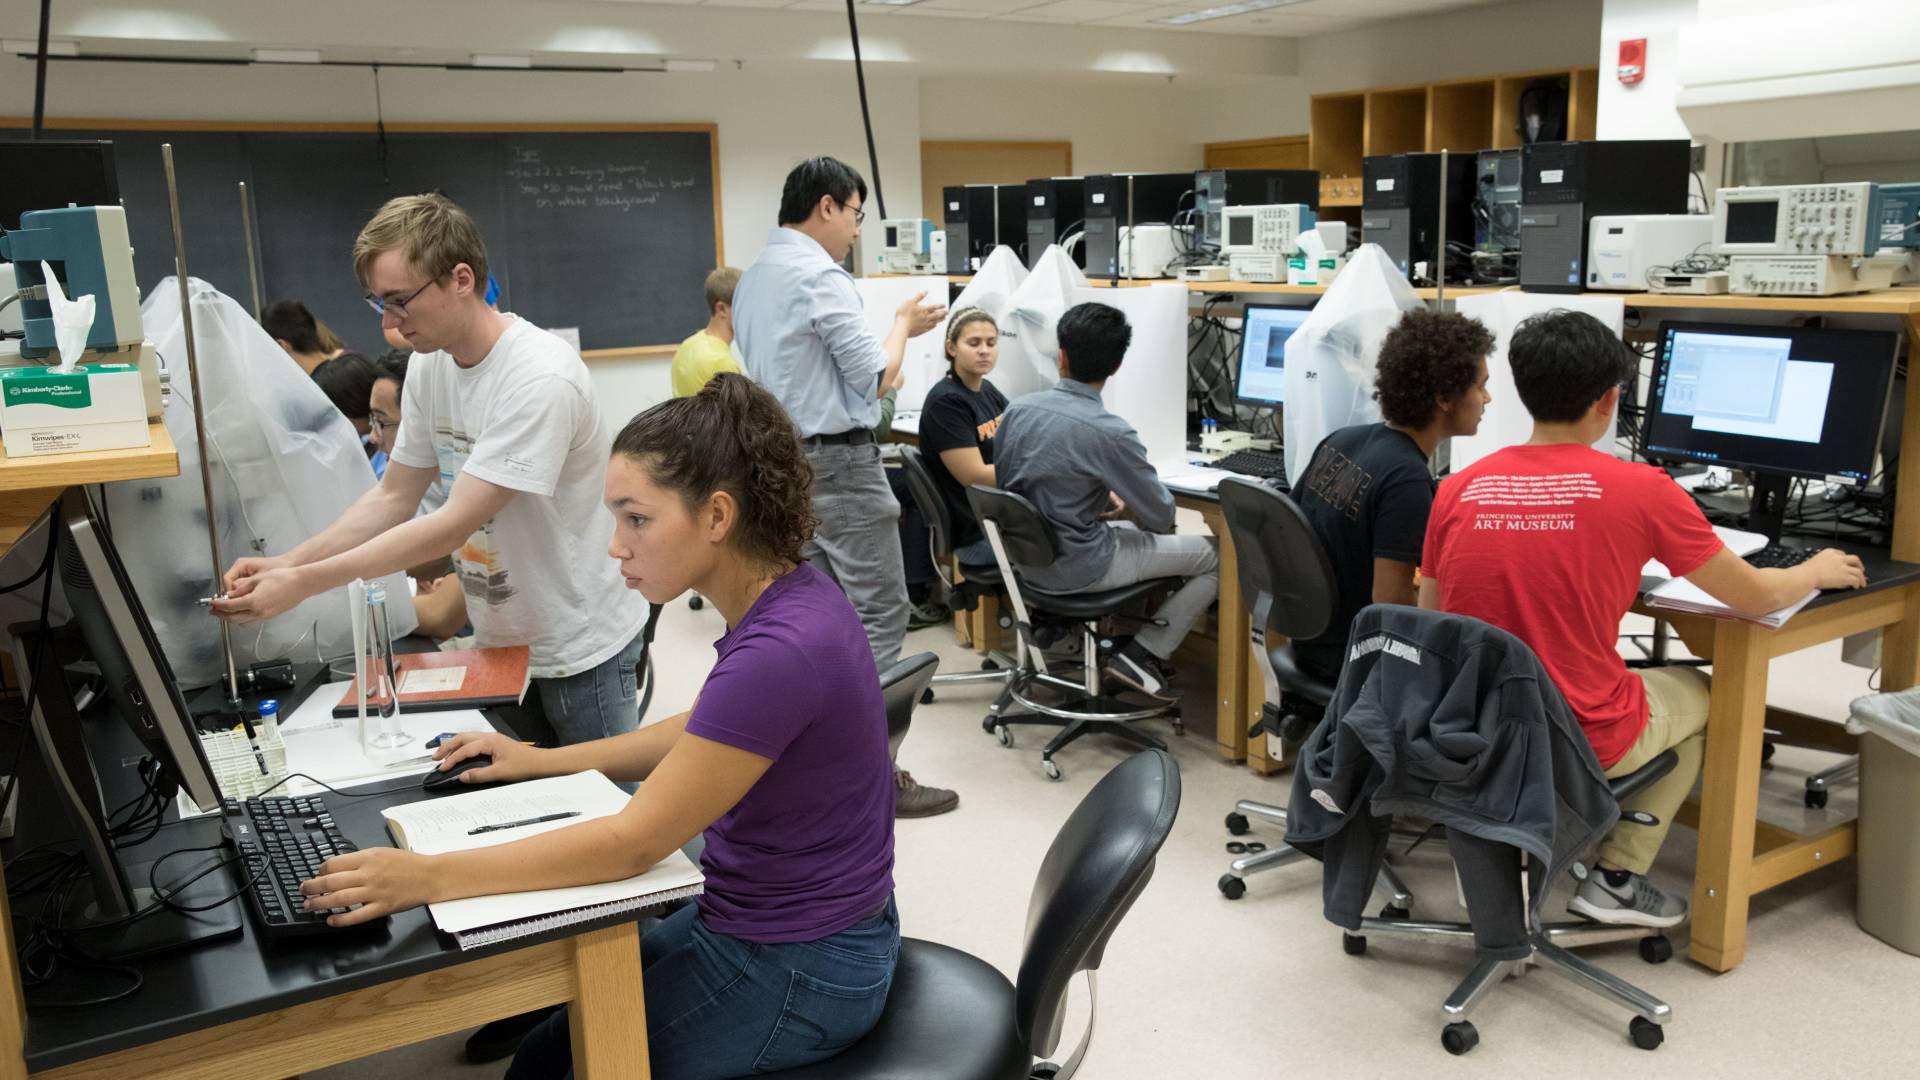 Students at computers in lab